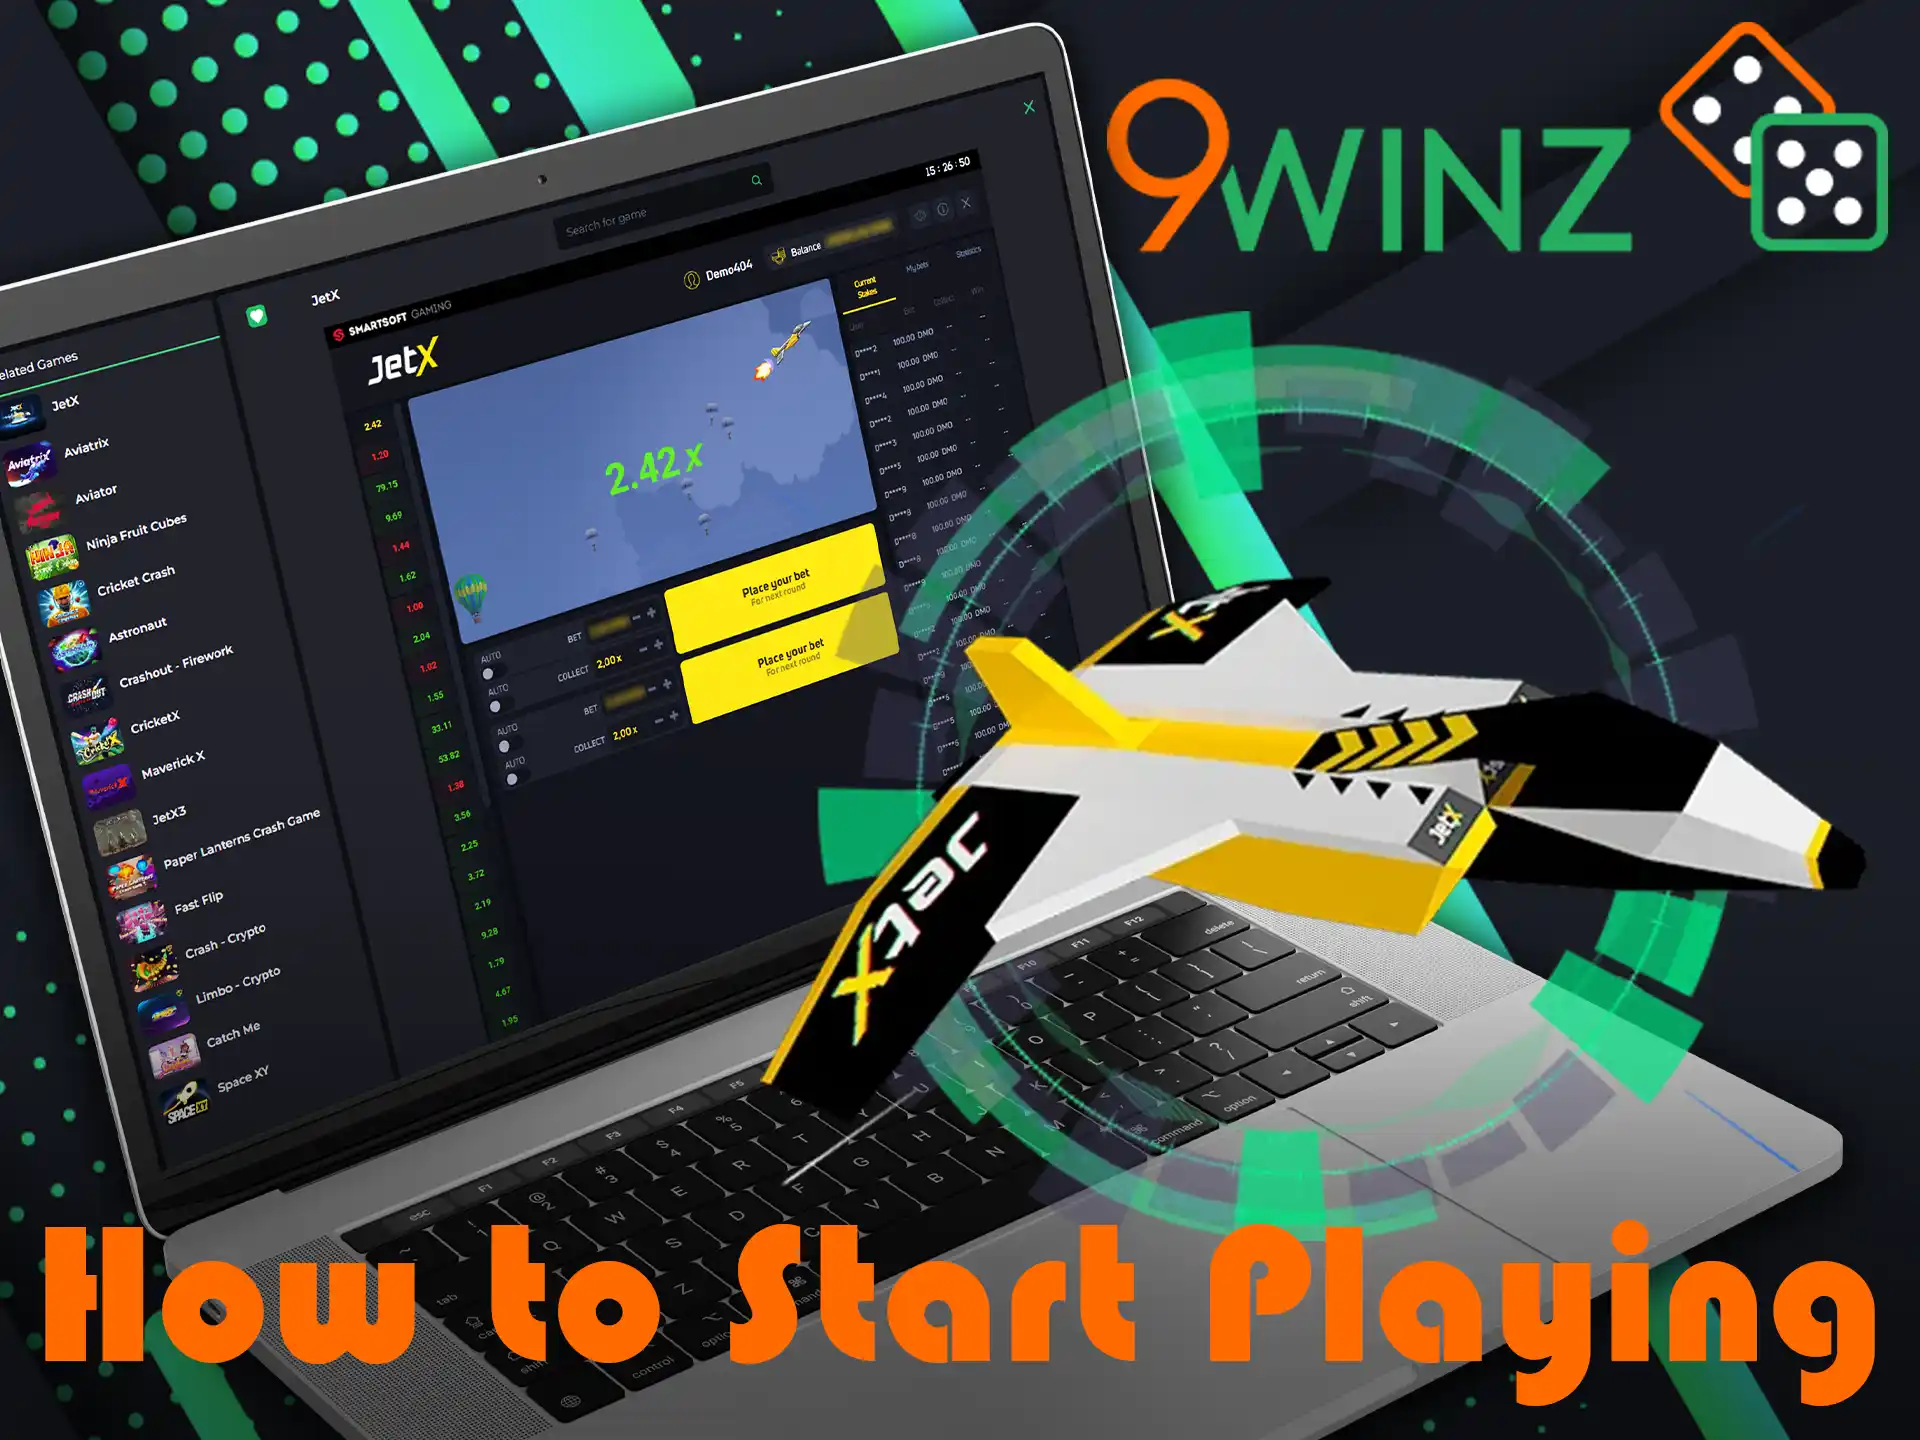 To start playing JetX game all users should register on the official 9Winz website and fund their accounts.